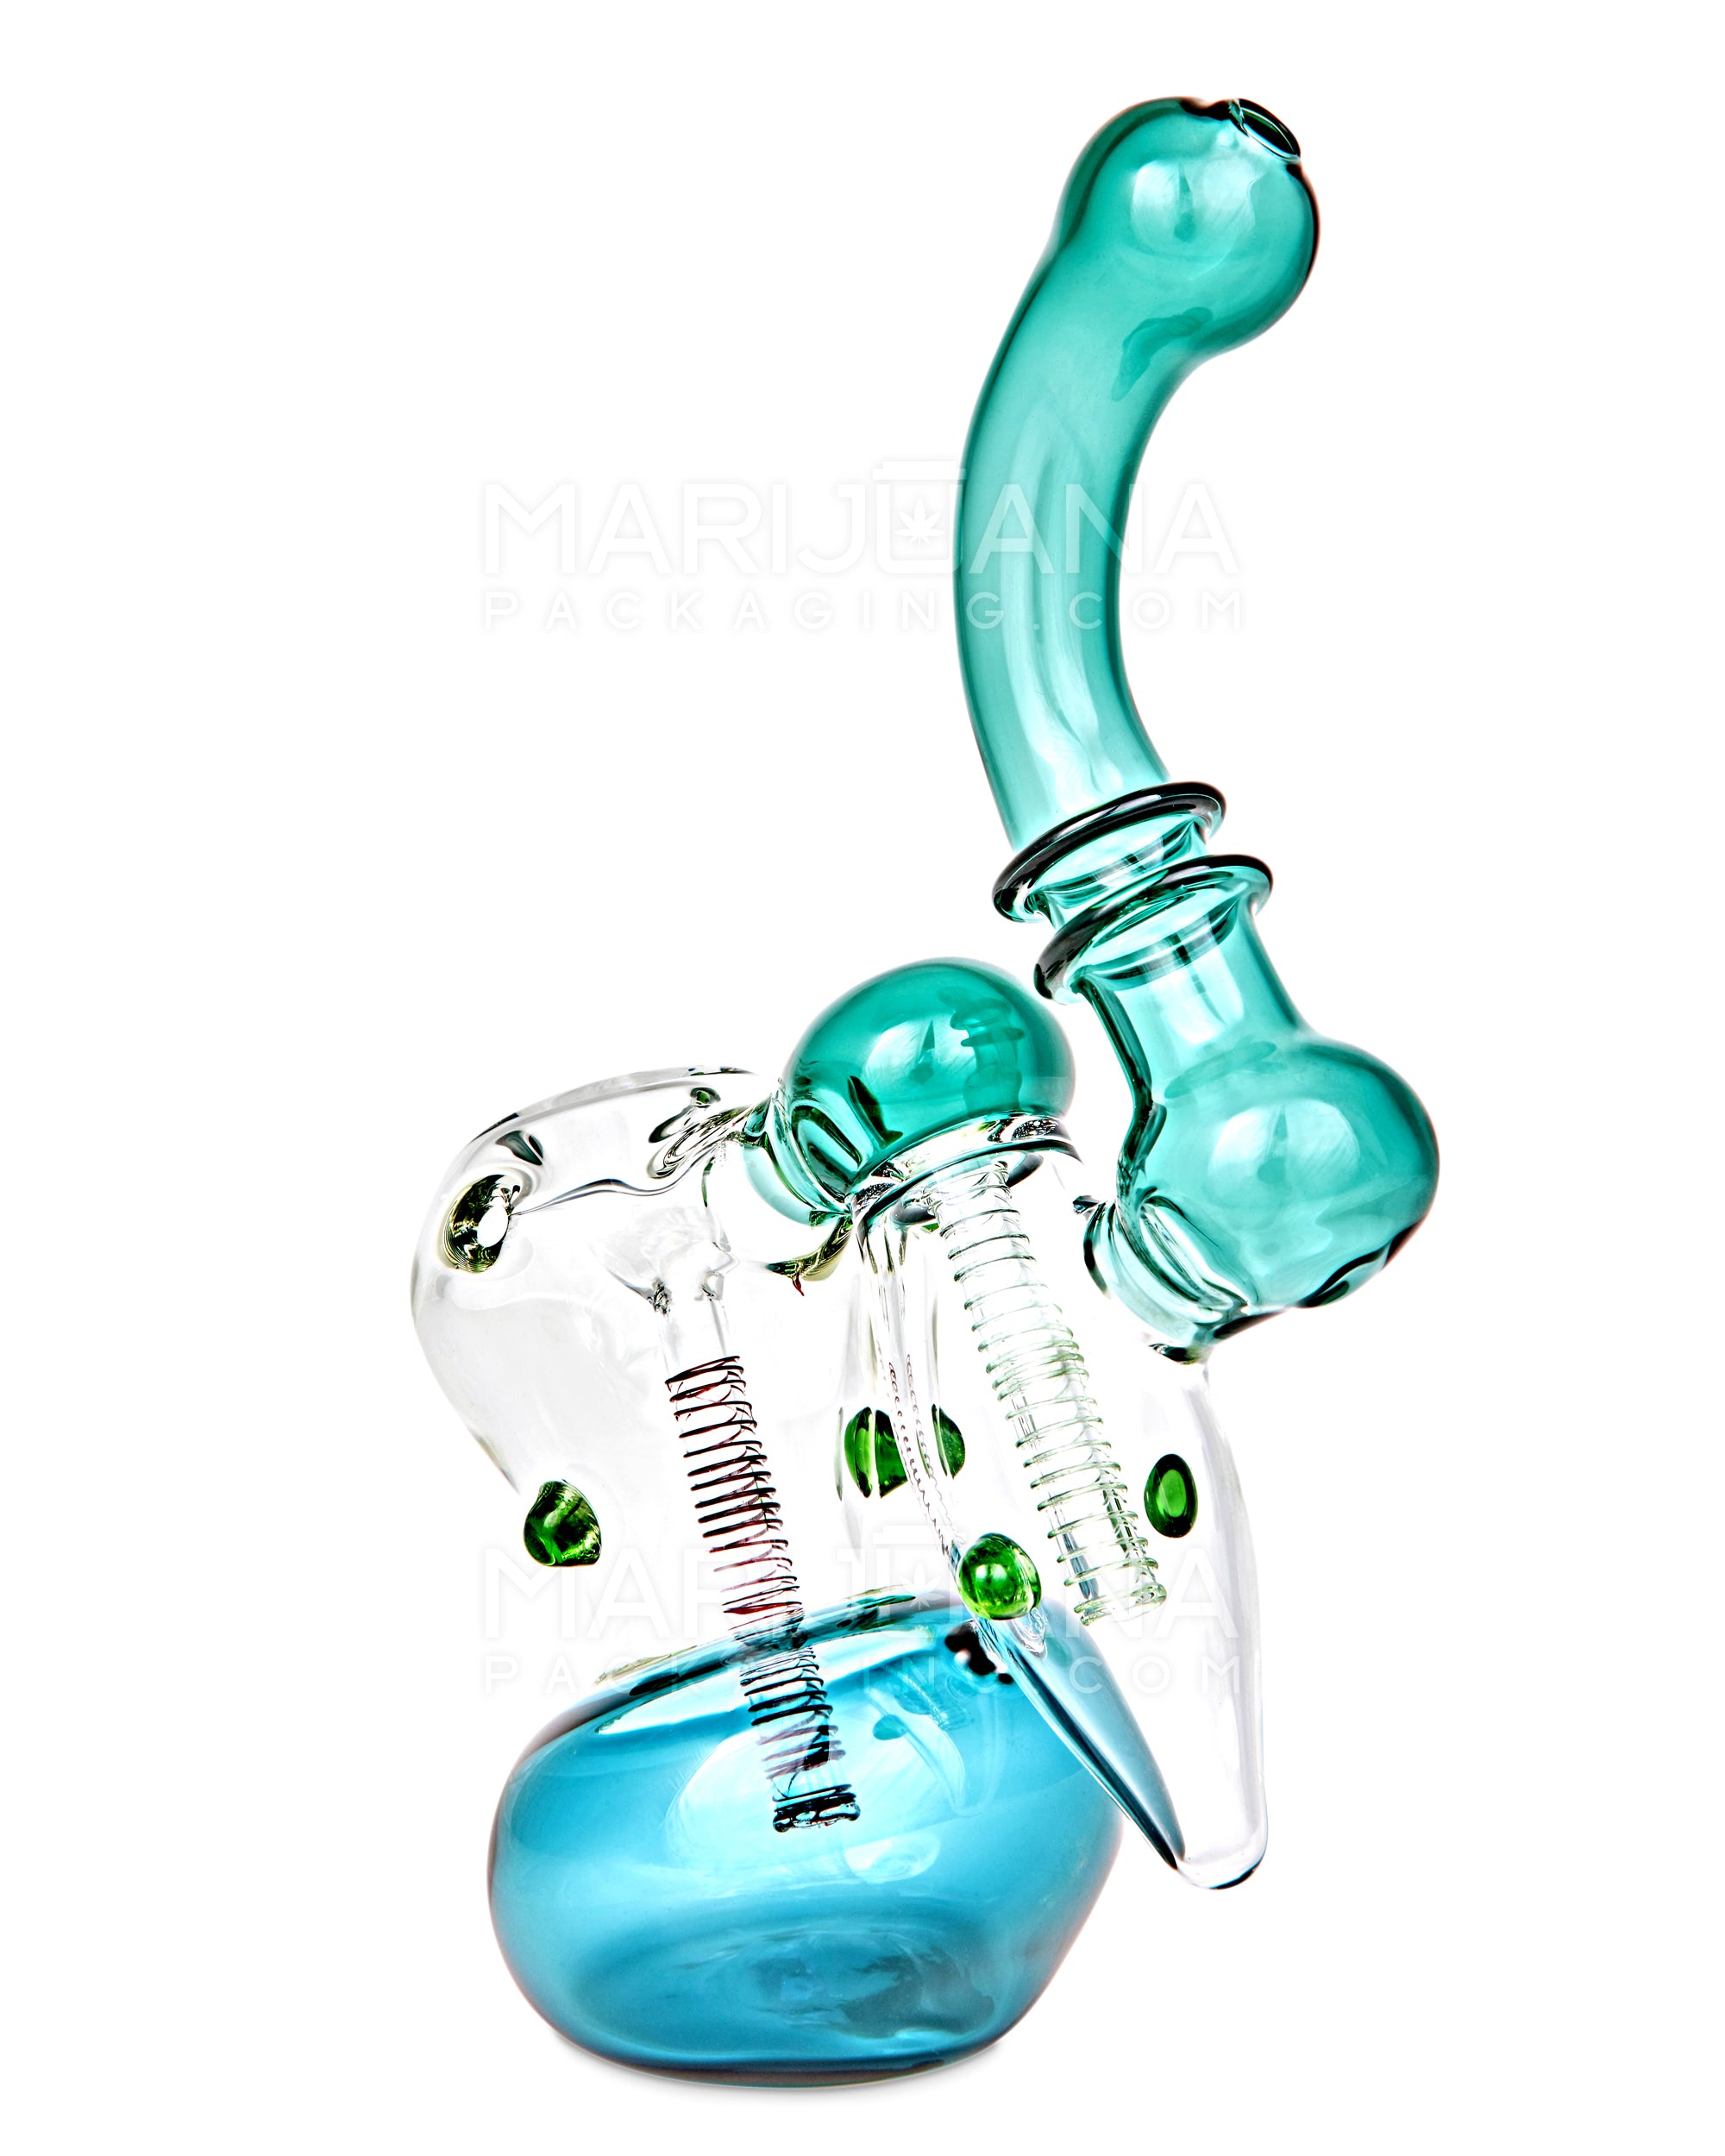 Ringed Double Chamber Bubbler w/ Multi Knockers | 7.5in Tall - Glass - Teal - 7